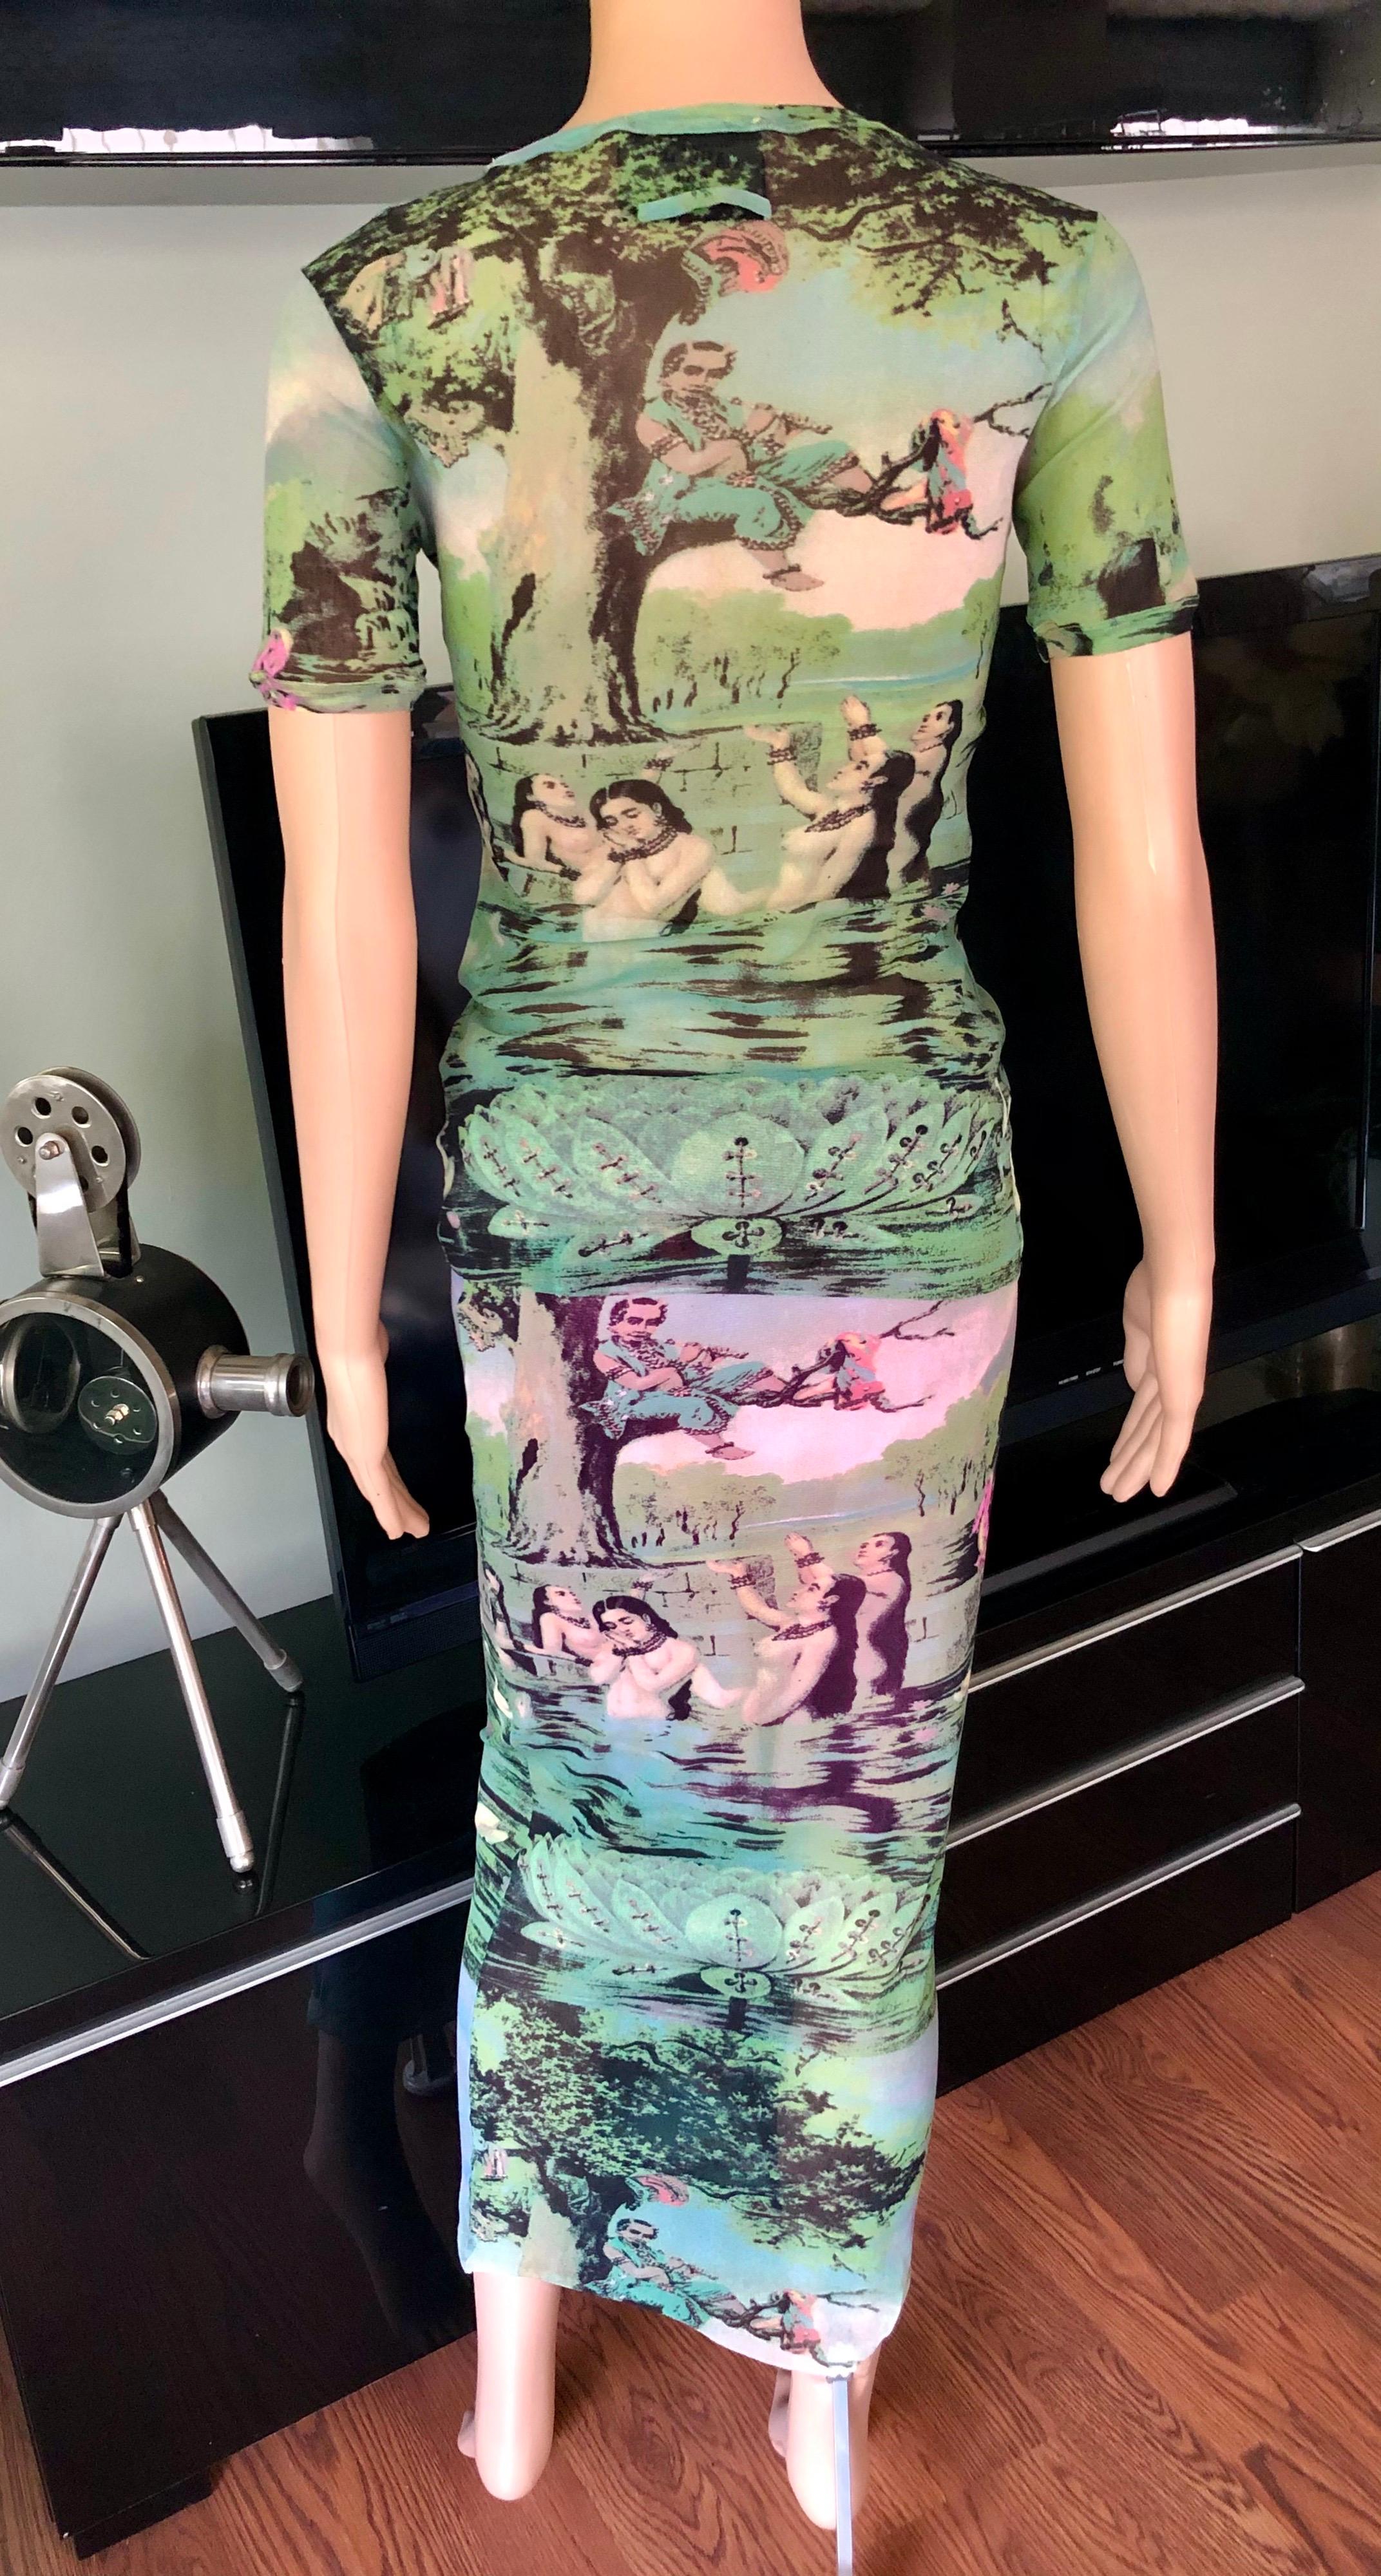 Jean Paul Gaultier Vintage Bodycon Oriental Bath Print Mesh Top & Maxi Skirt Ensemble 2 Piece Set Size S

Please note the size tag on the skirt has been removed and the top is S.

